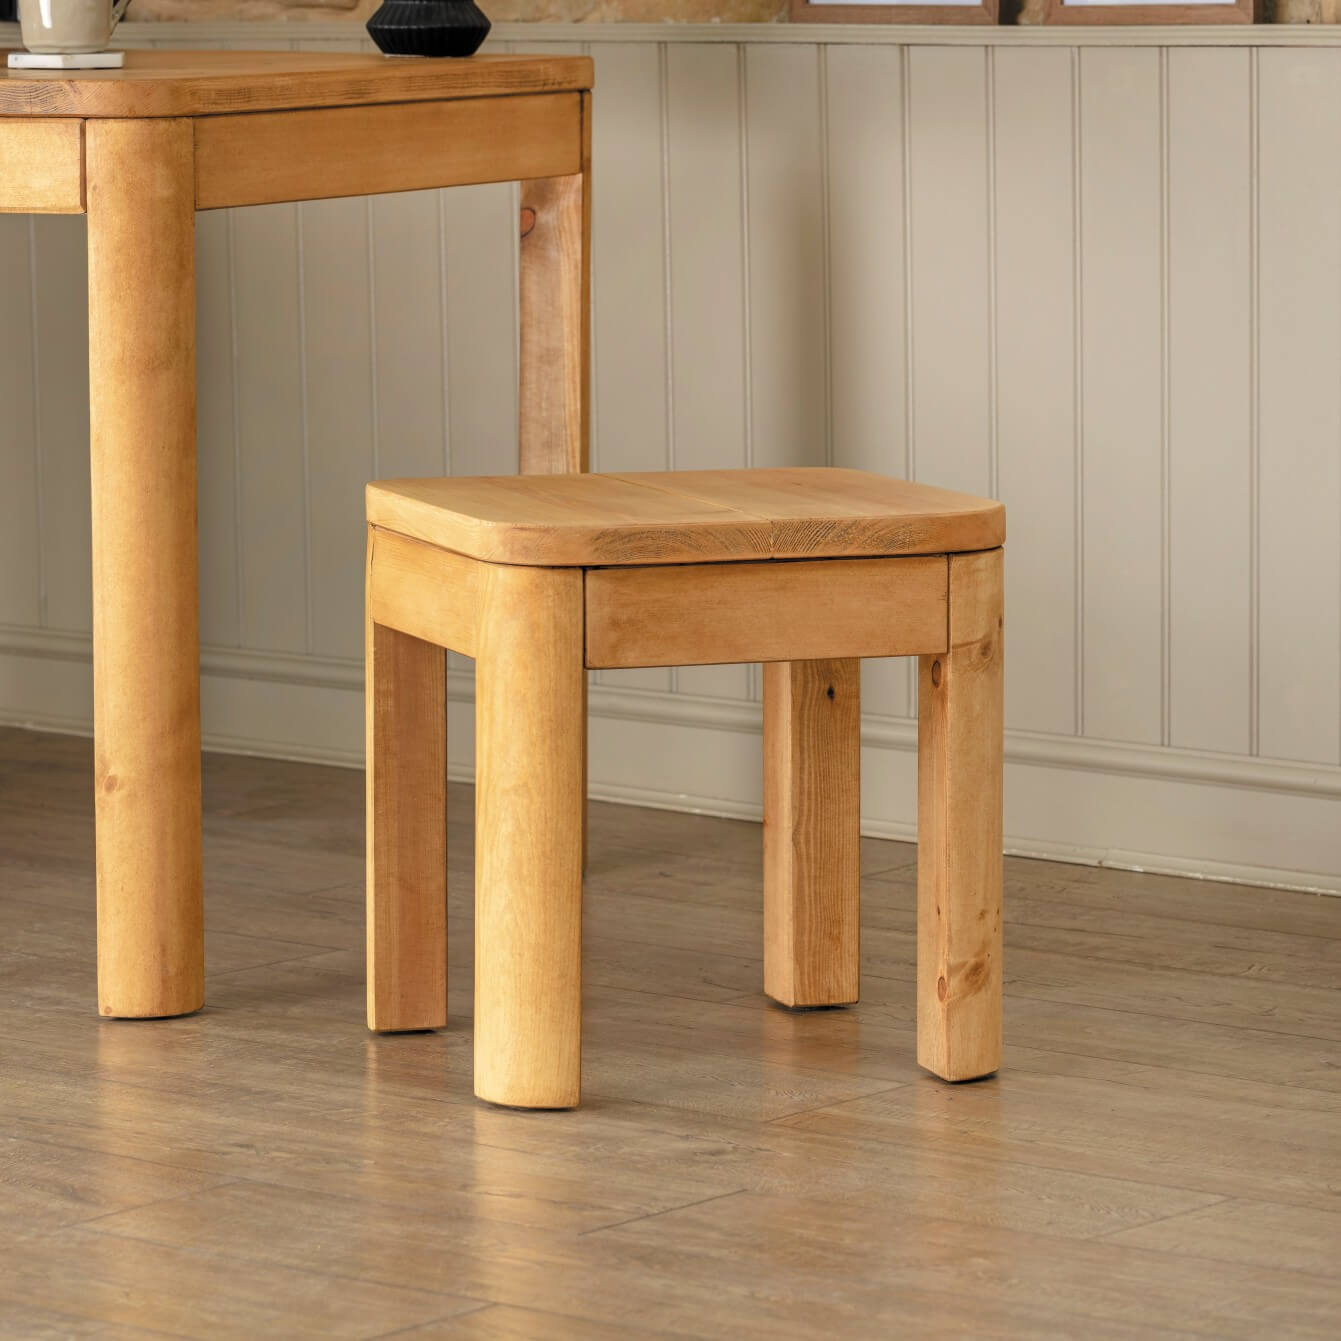 Image of Gosforth Dining Stool made in the UK by Funky Chunky Furniture. Buying this product supports a UK business, jobs and the local community